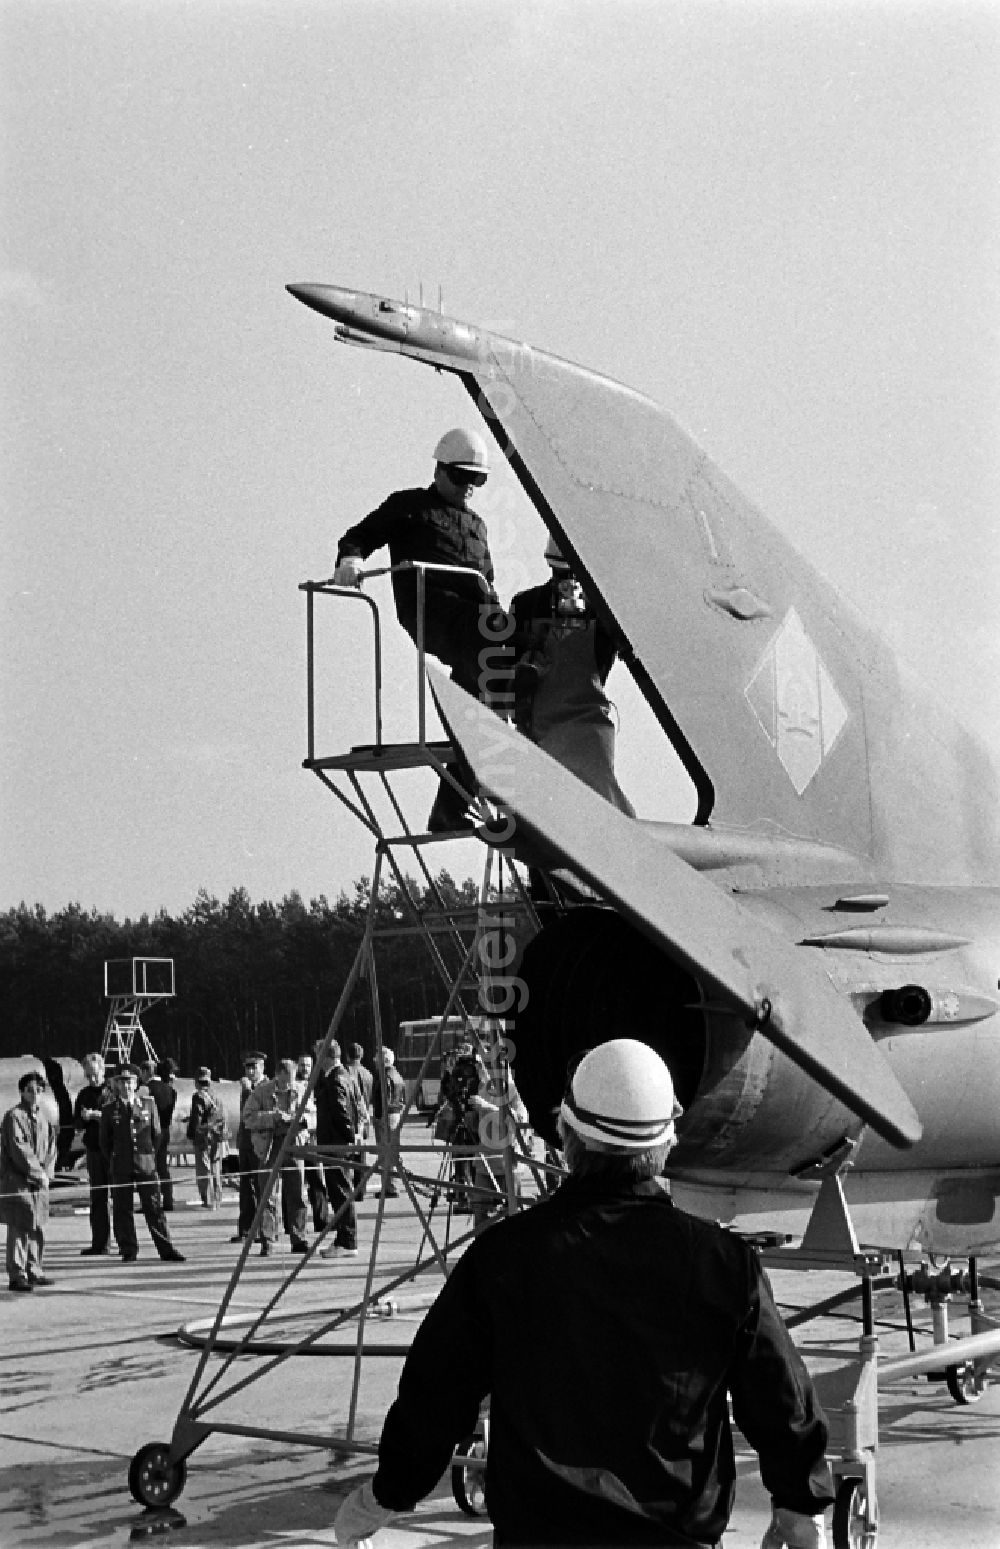 GDR picture archive: Jänschwalde - Destruction, dismantling of flight technology and equipment of the MiG-21 PFM weapon system as part of a disarmament action at the Drewitz airfield of the fighter pilot squadron Wilhelm Pieck of the air force of the National People's Army NVA office in Jaenschwalde in the state of Brandenburg on the territory of the former GDR, German Democratic Republic